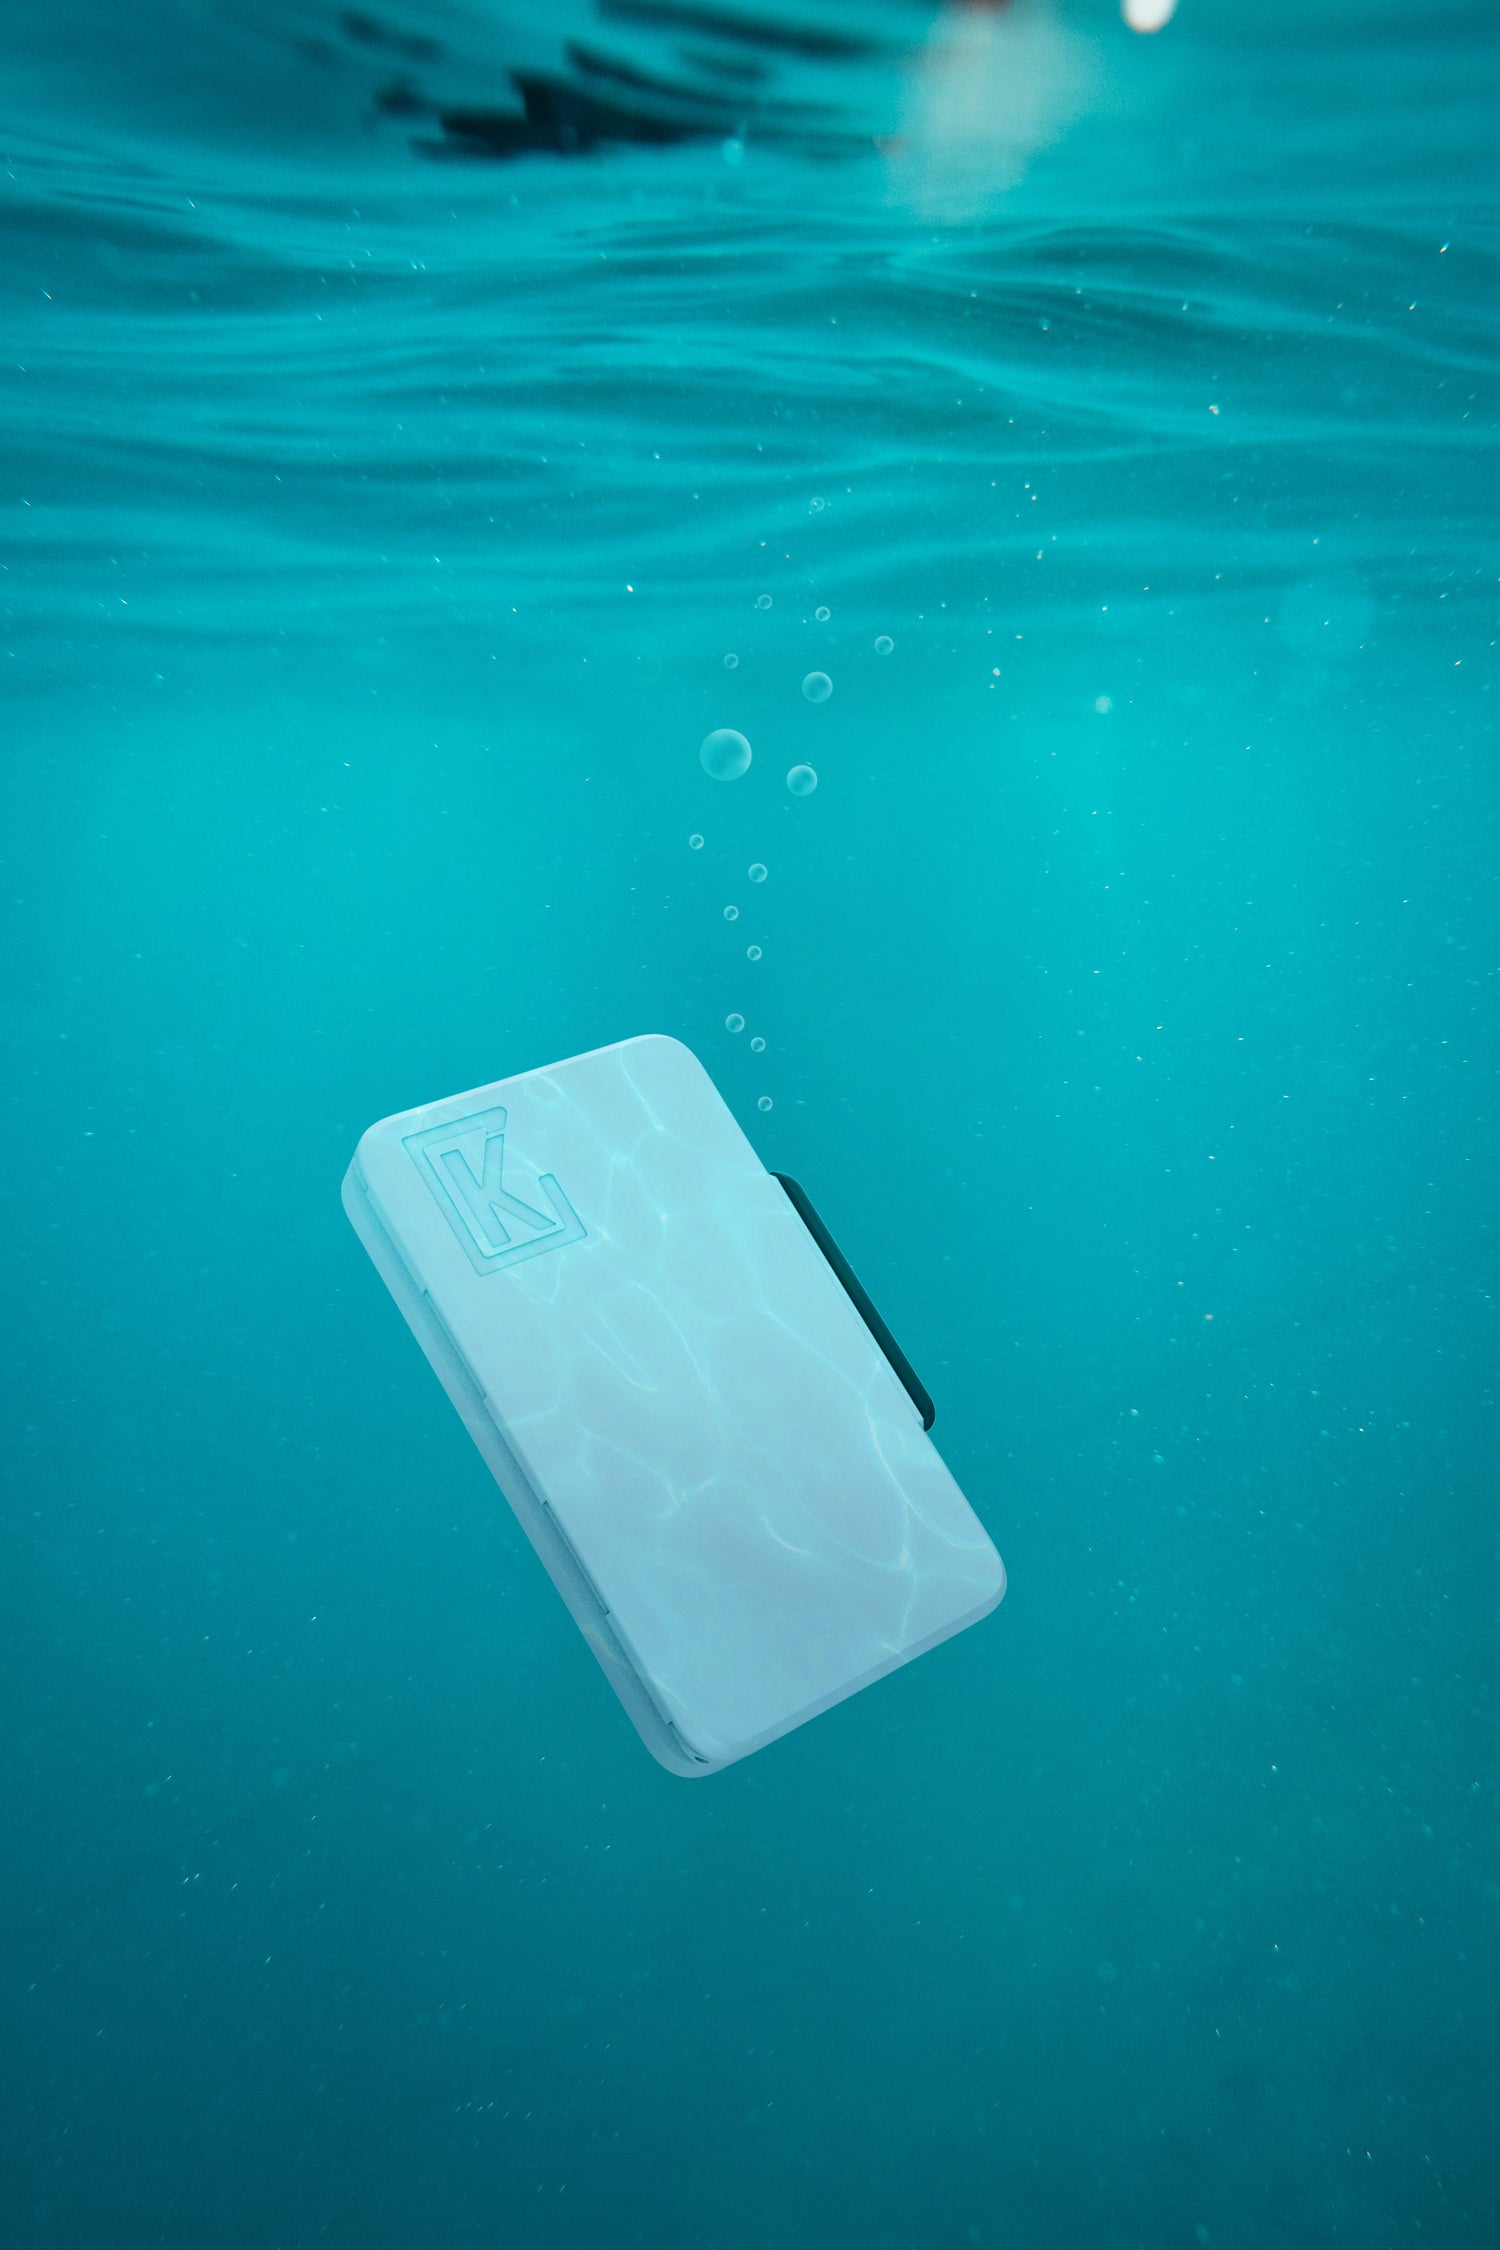 Photo of the white Kelo case fully submerged in water. The gasket seal makes this a water resistant joint case